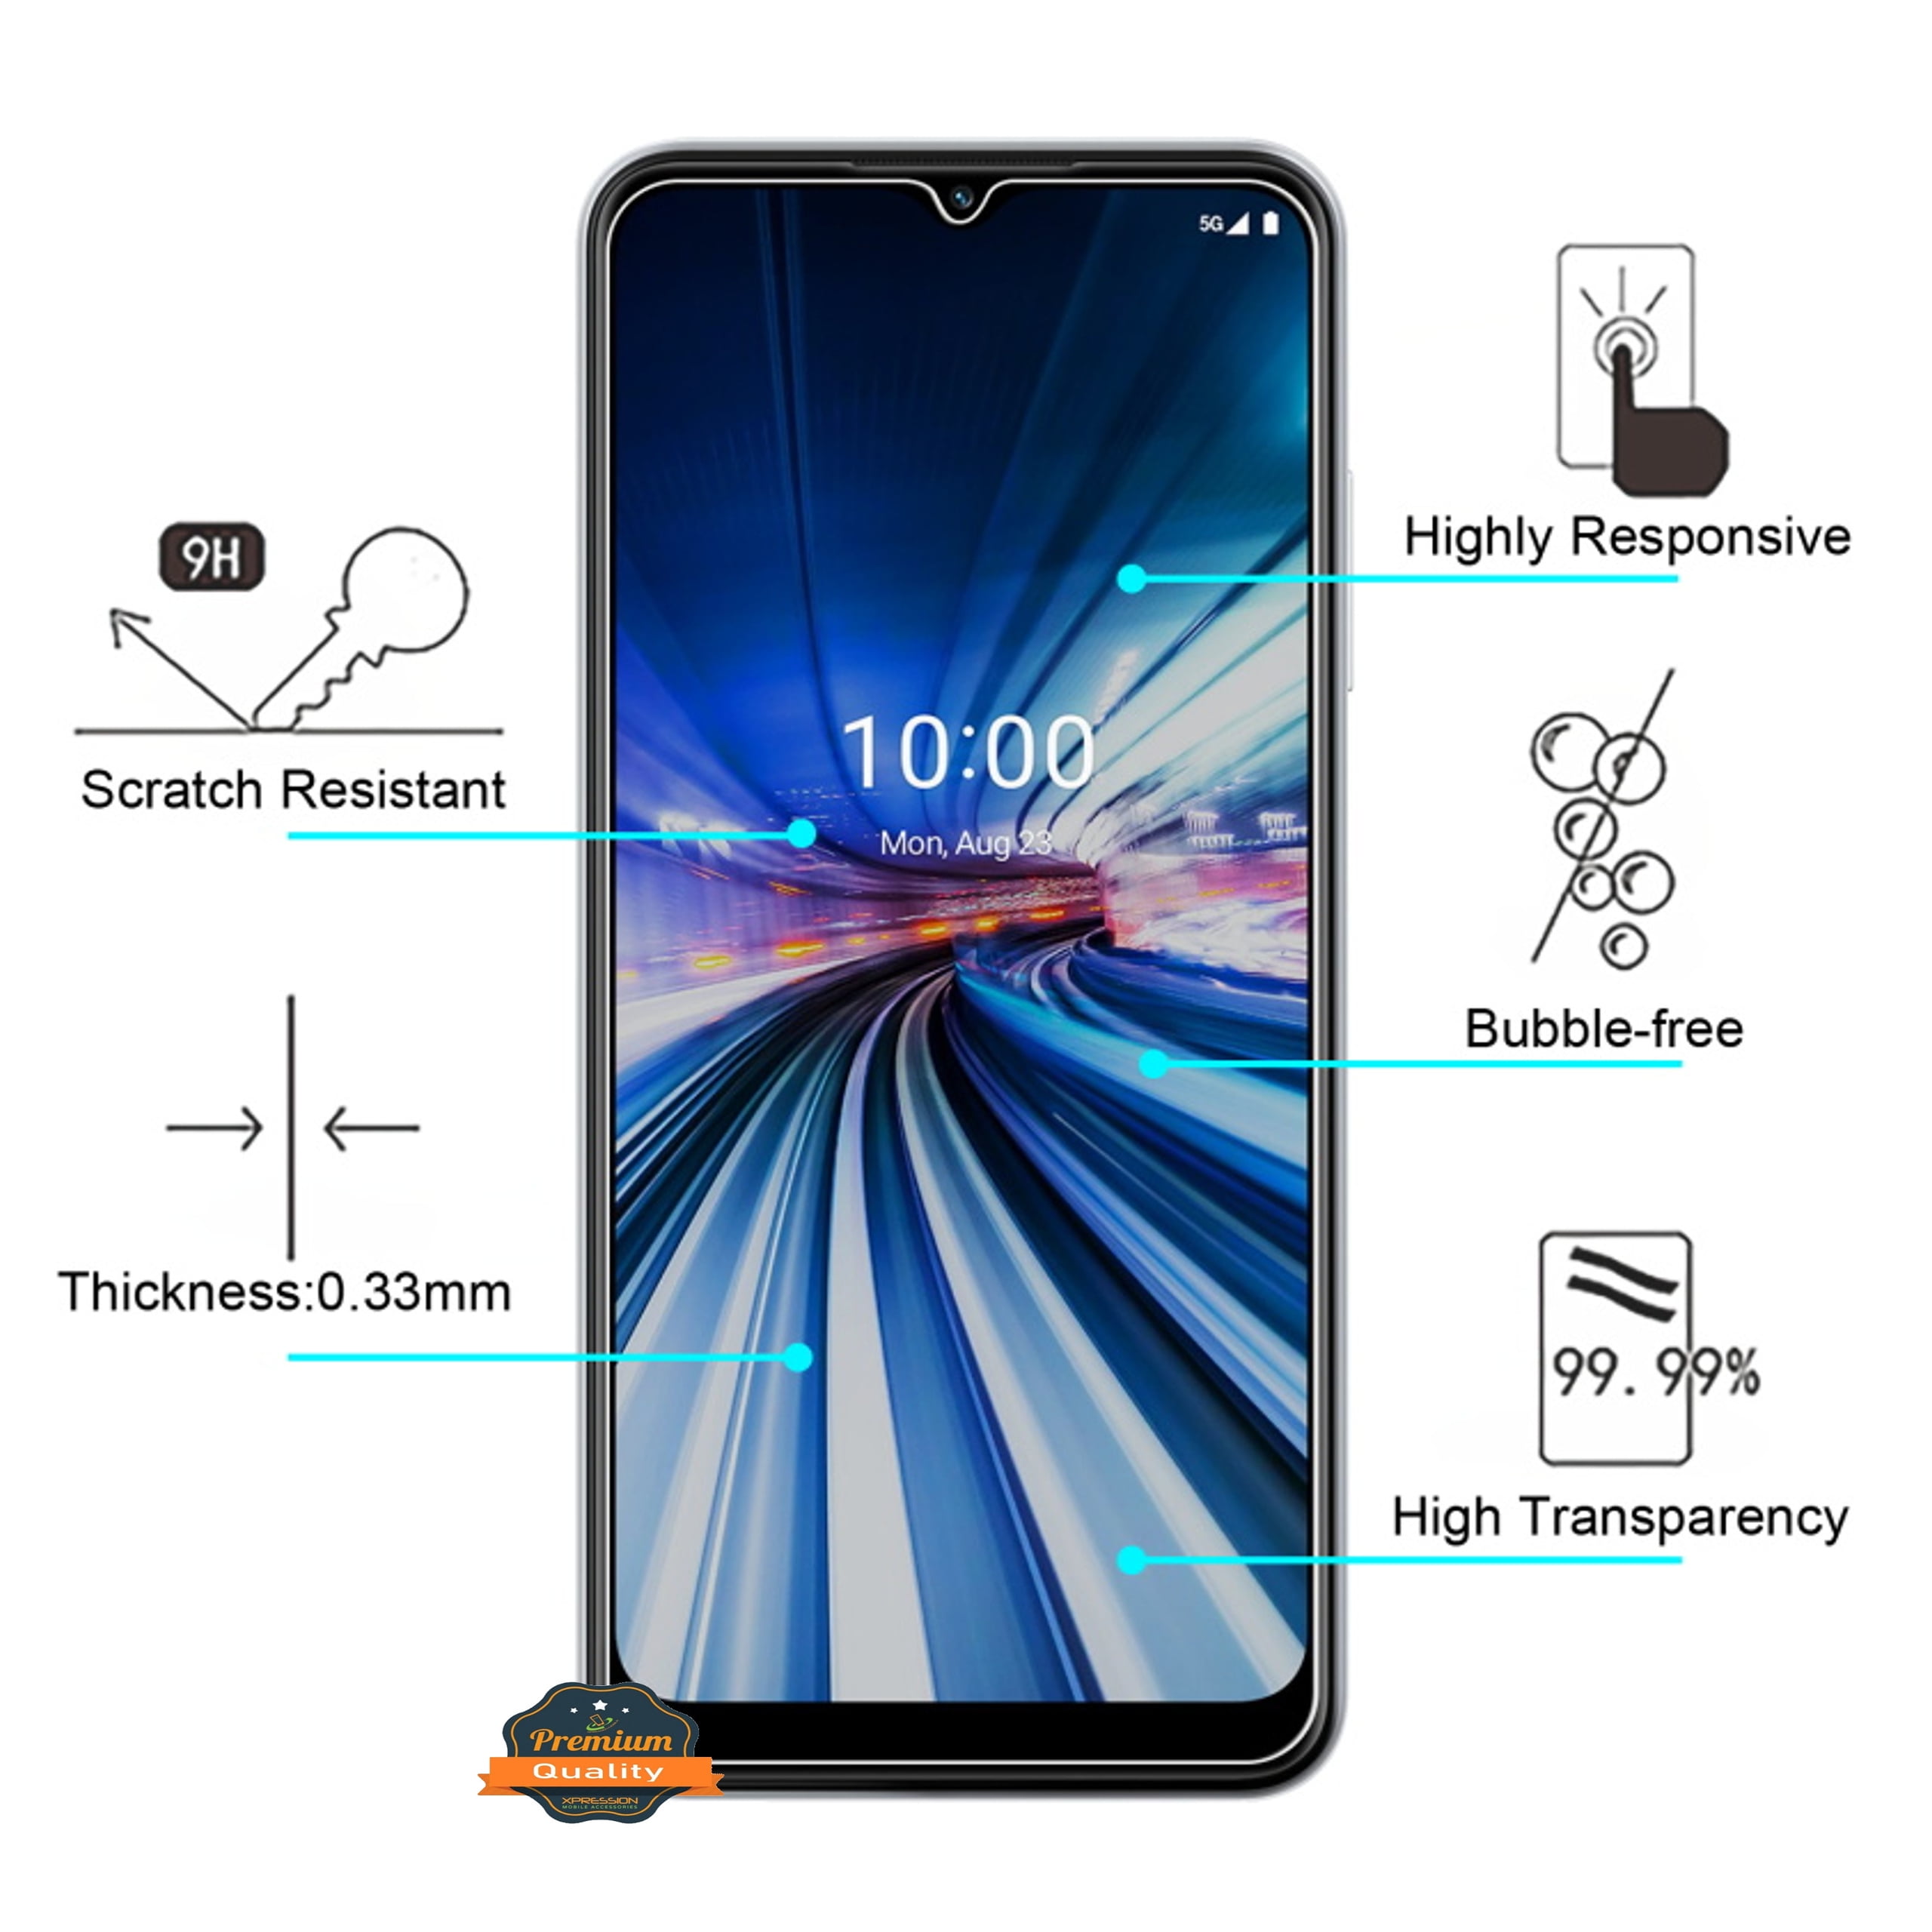 Xclear 3 Pack Screen Protector Designed for Galaxy Note 10 2019 Case Friendly TPU Film Anti-Scratch HD Protector Compatible with Samsung Galaxy No